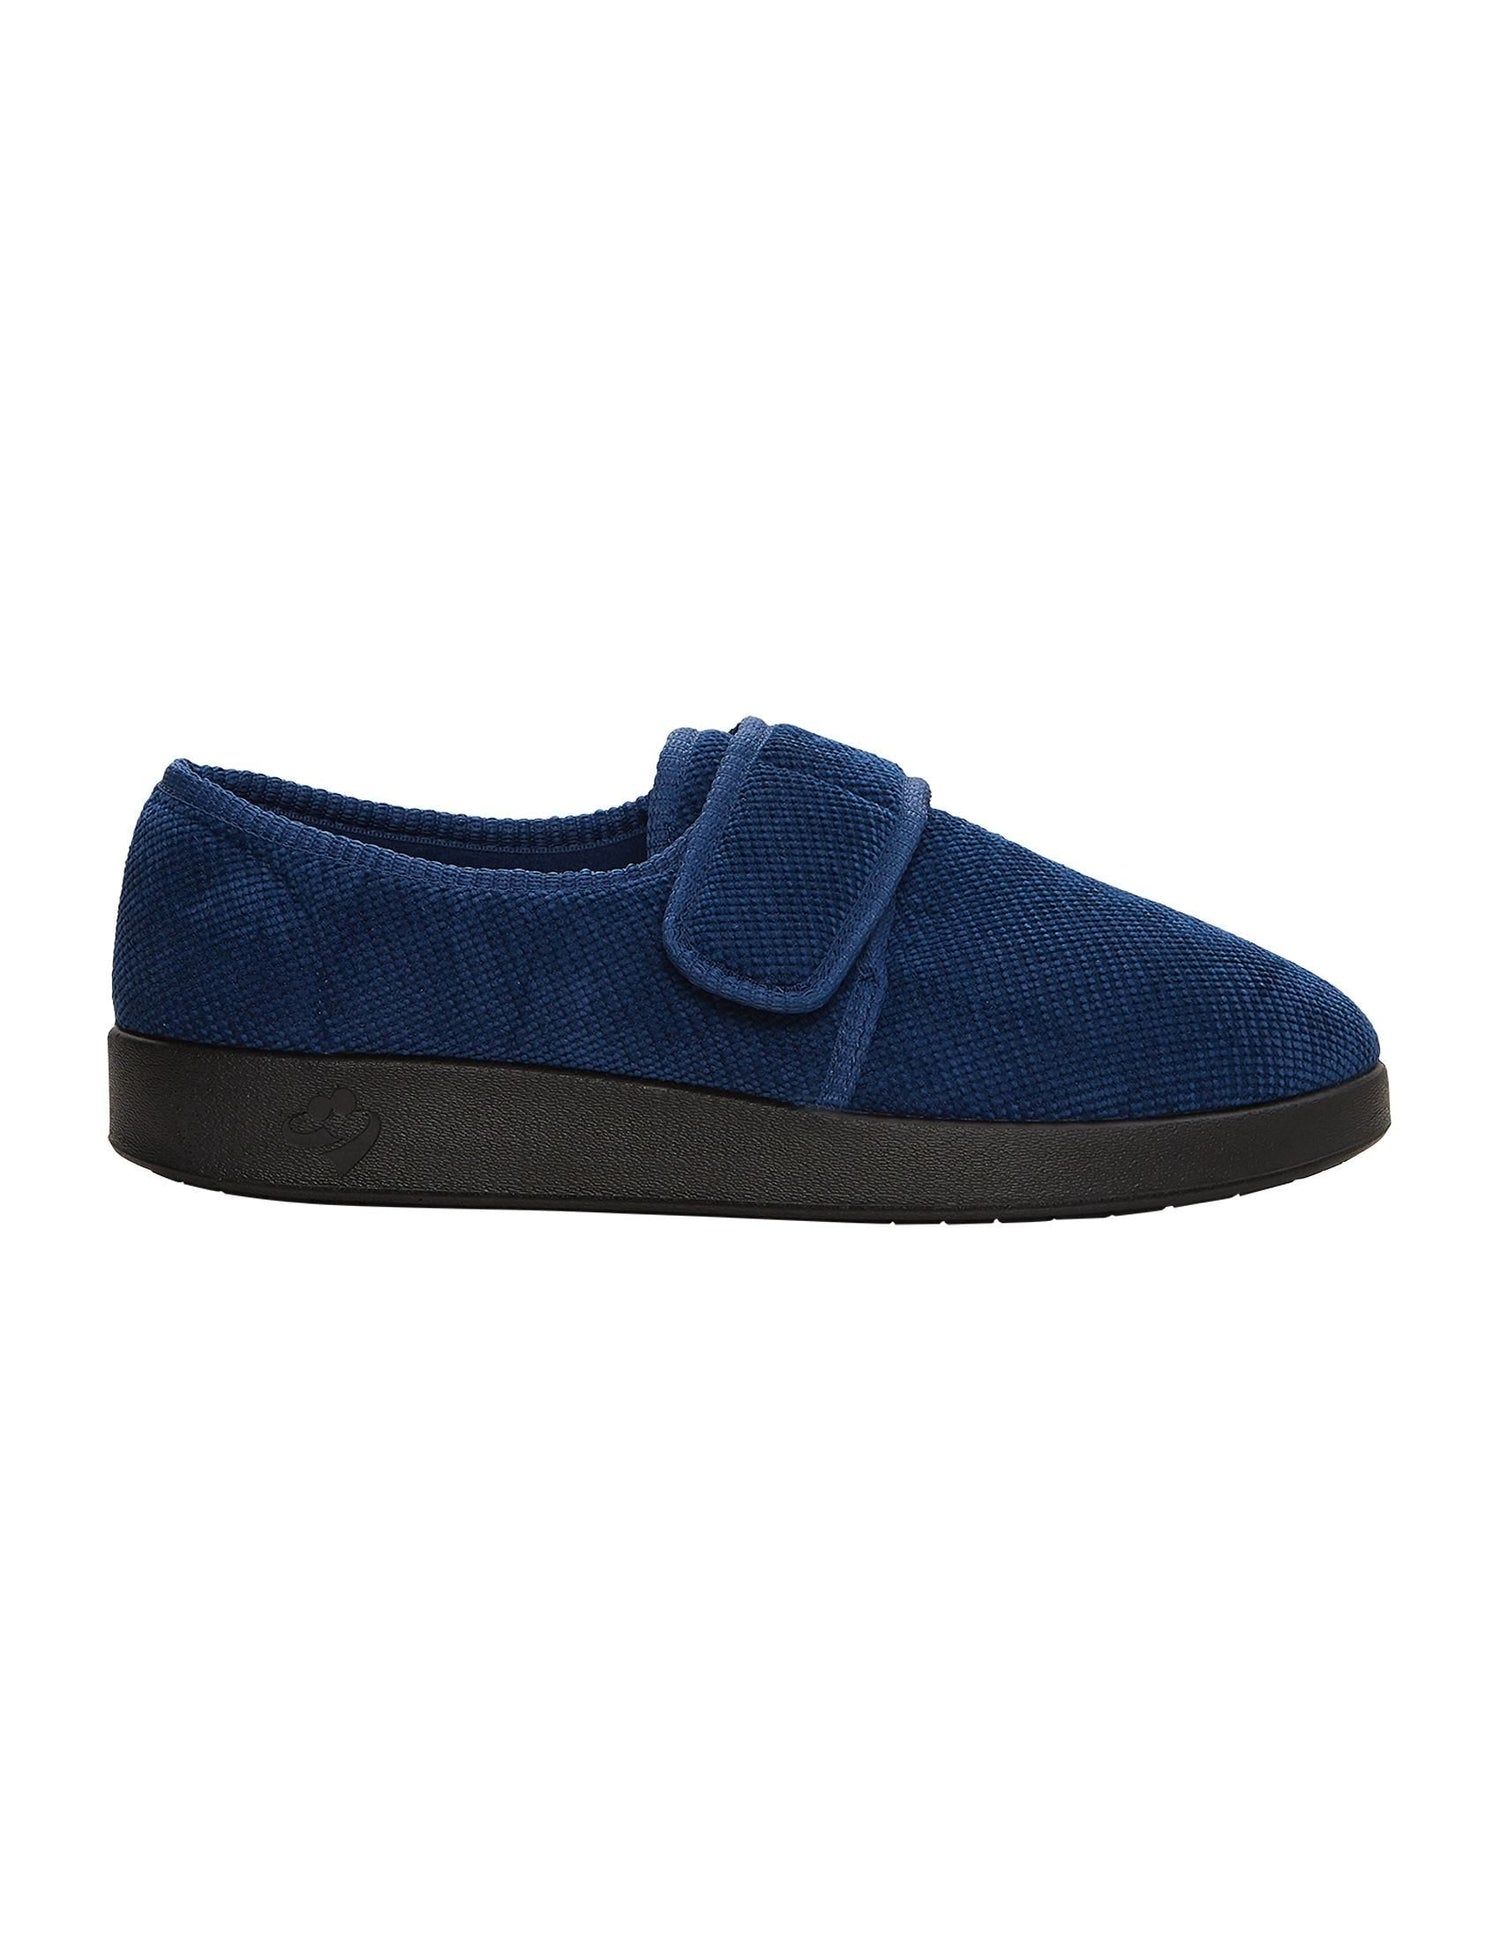 Side of wide navy non-slip indoor slippers with large Velcro closure at top adjusting fit